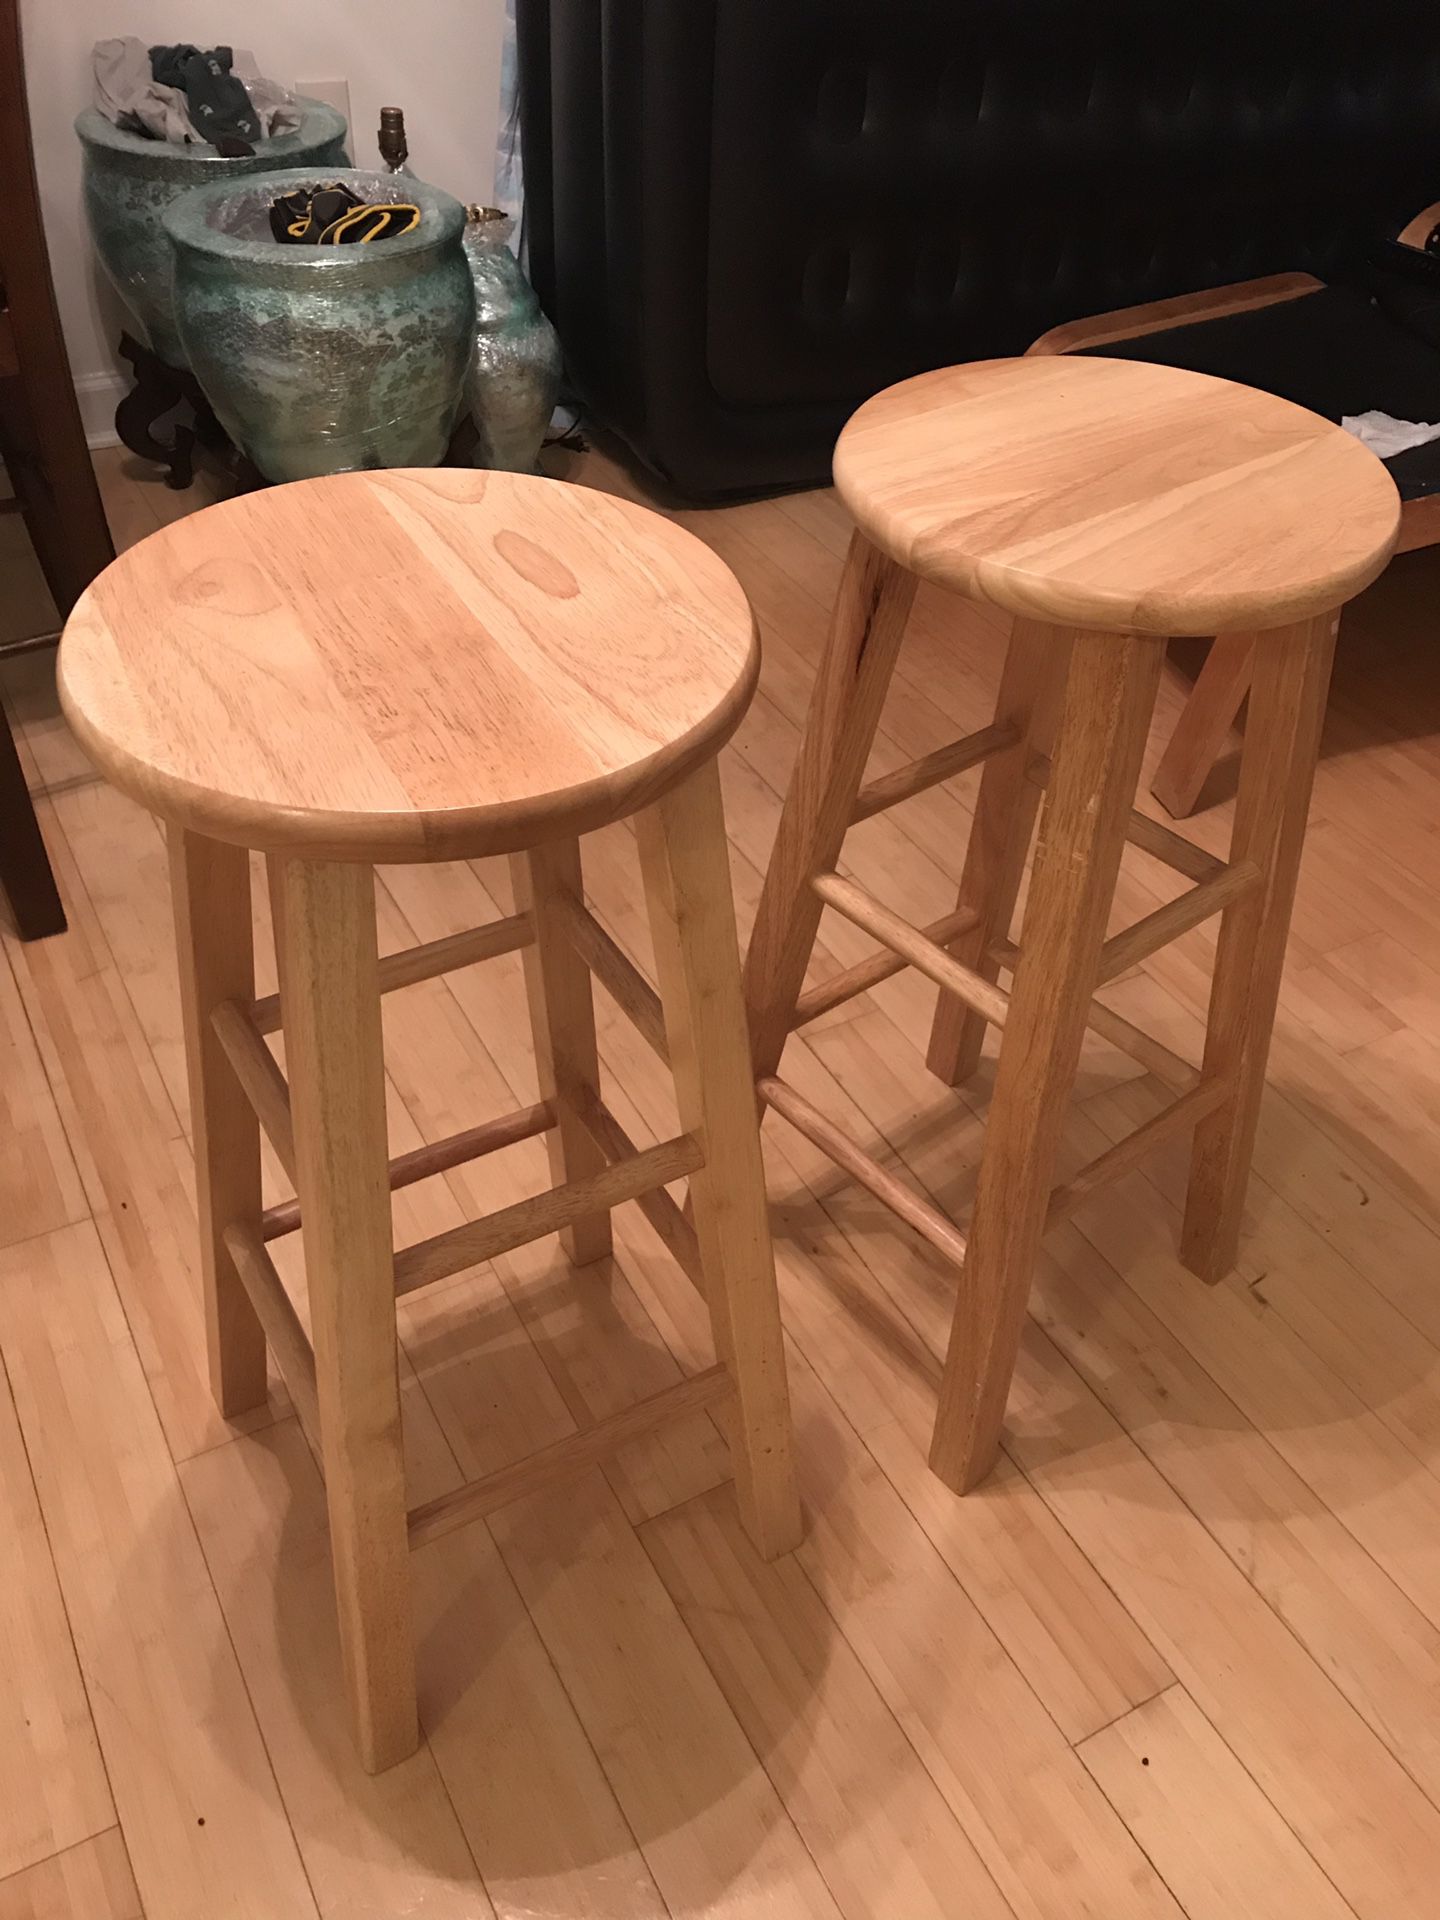 Very handsome, Solid birch bar/kitchen stools- 29” tall